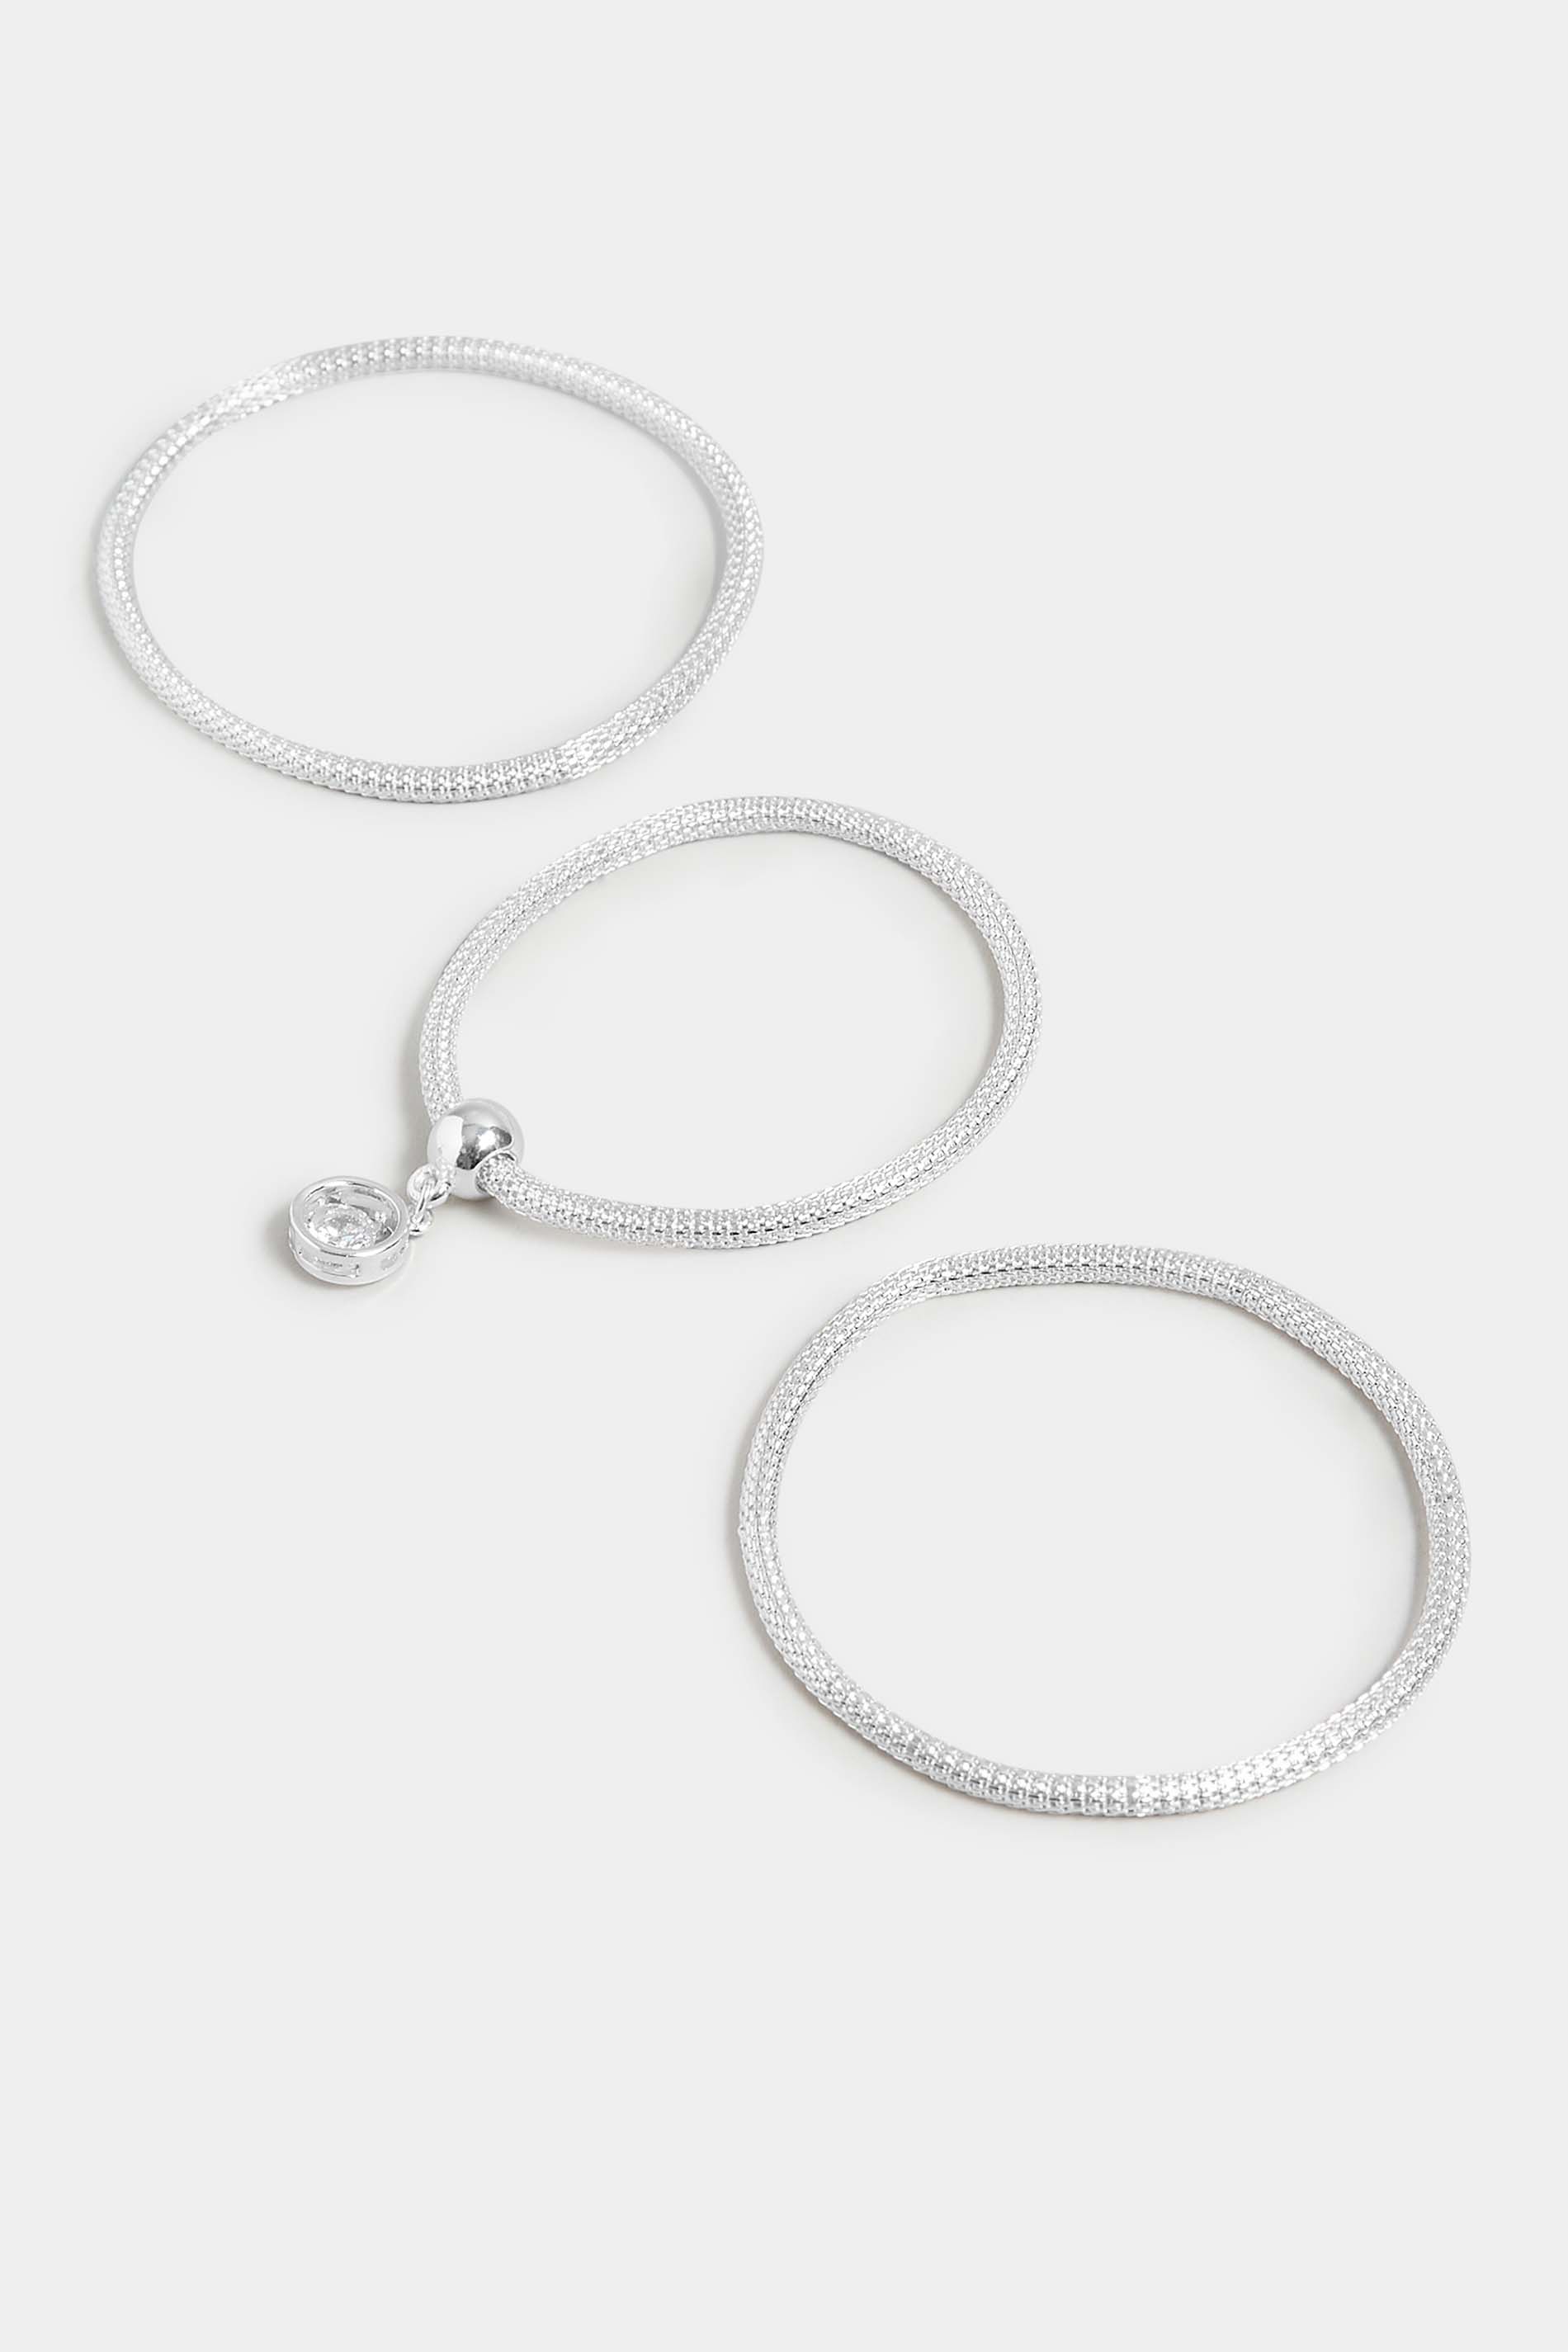 3 PACK Silver Rope Charm Bracelet Set | Yours Clothing  2